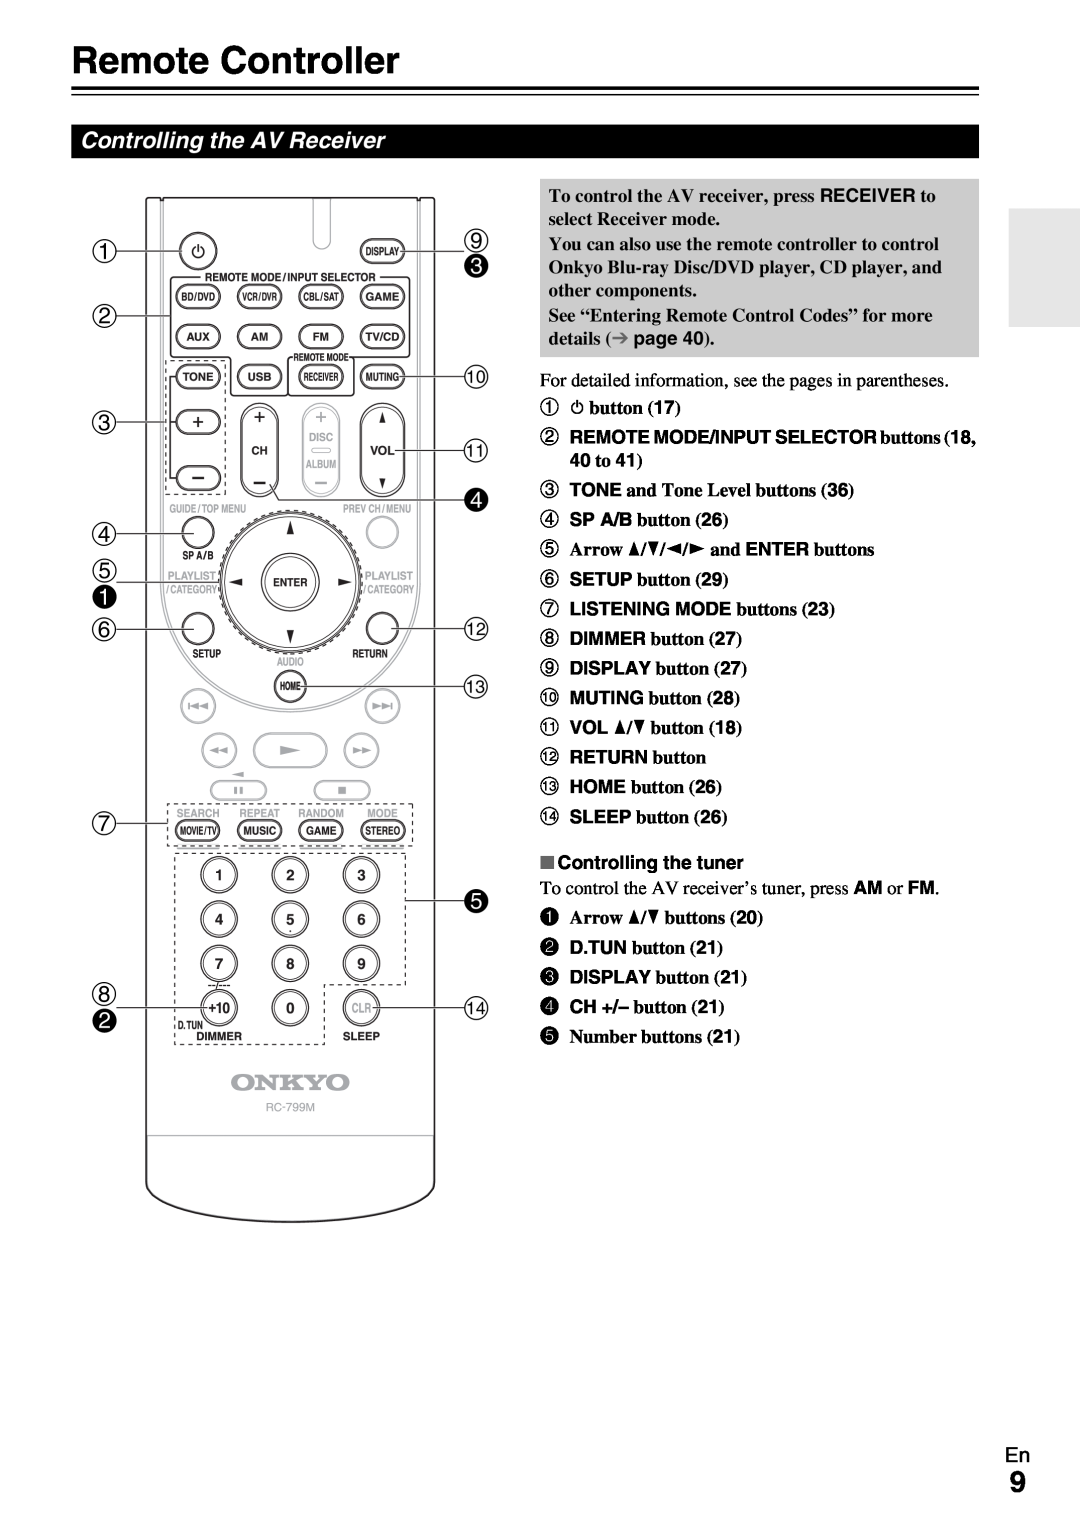 Onkyo HT-RC330 instruction manual Remote Controller 